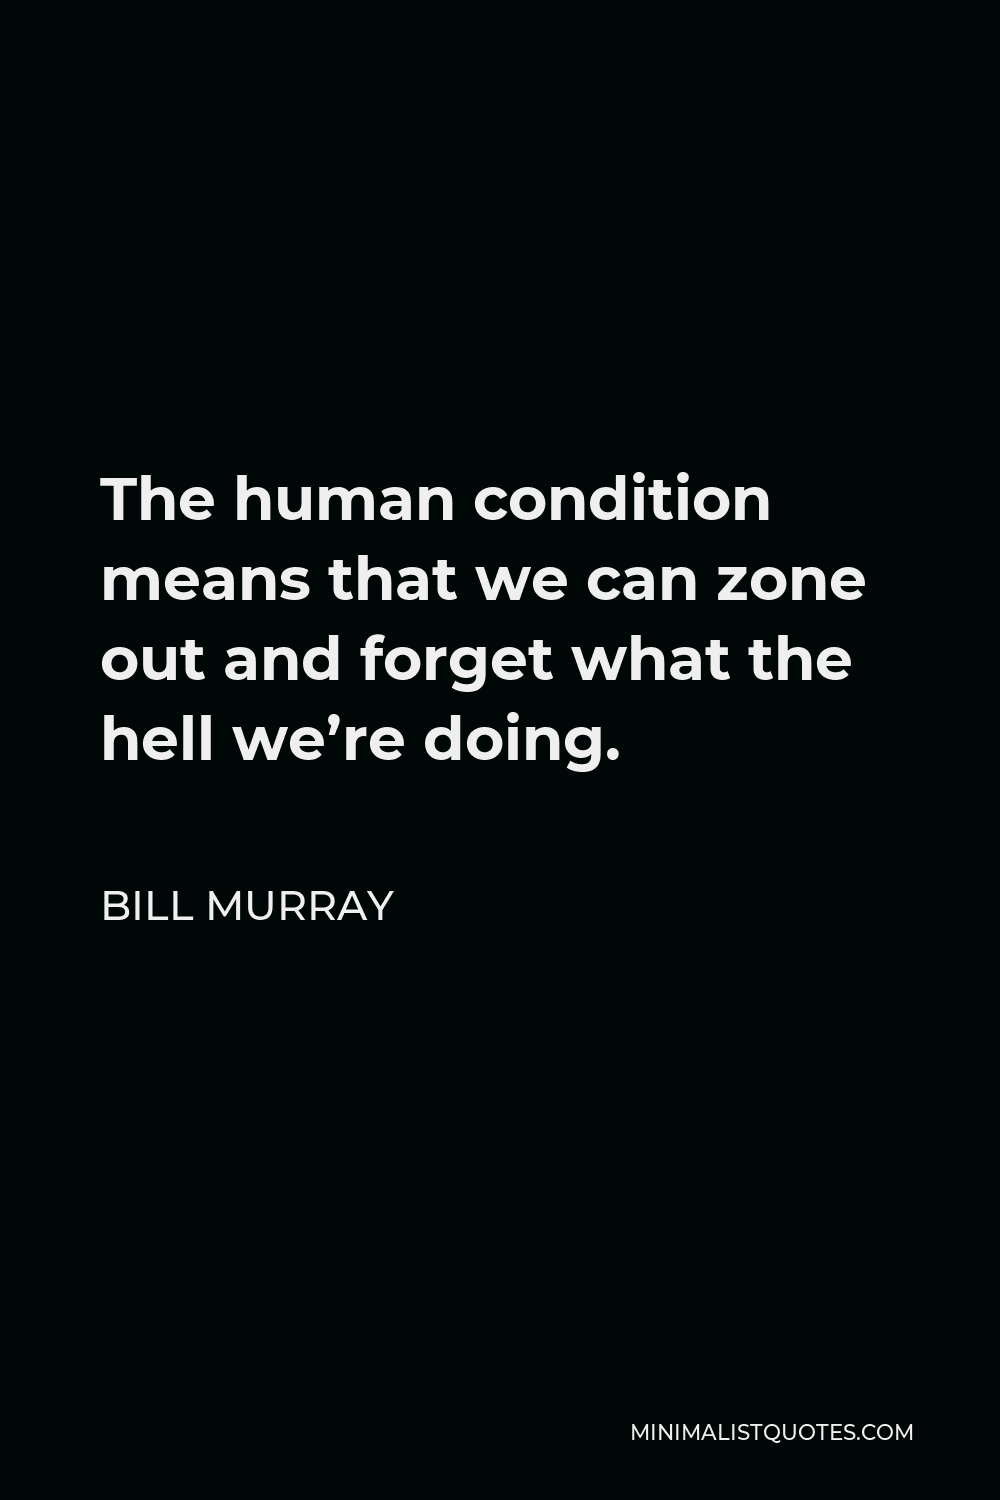 Bill Murray Quote - The human condition means that we can zone out and forget what the hell we’re doing.